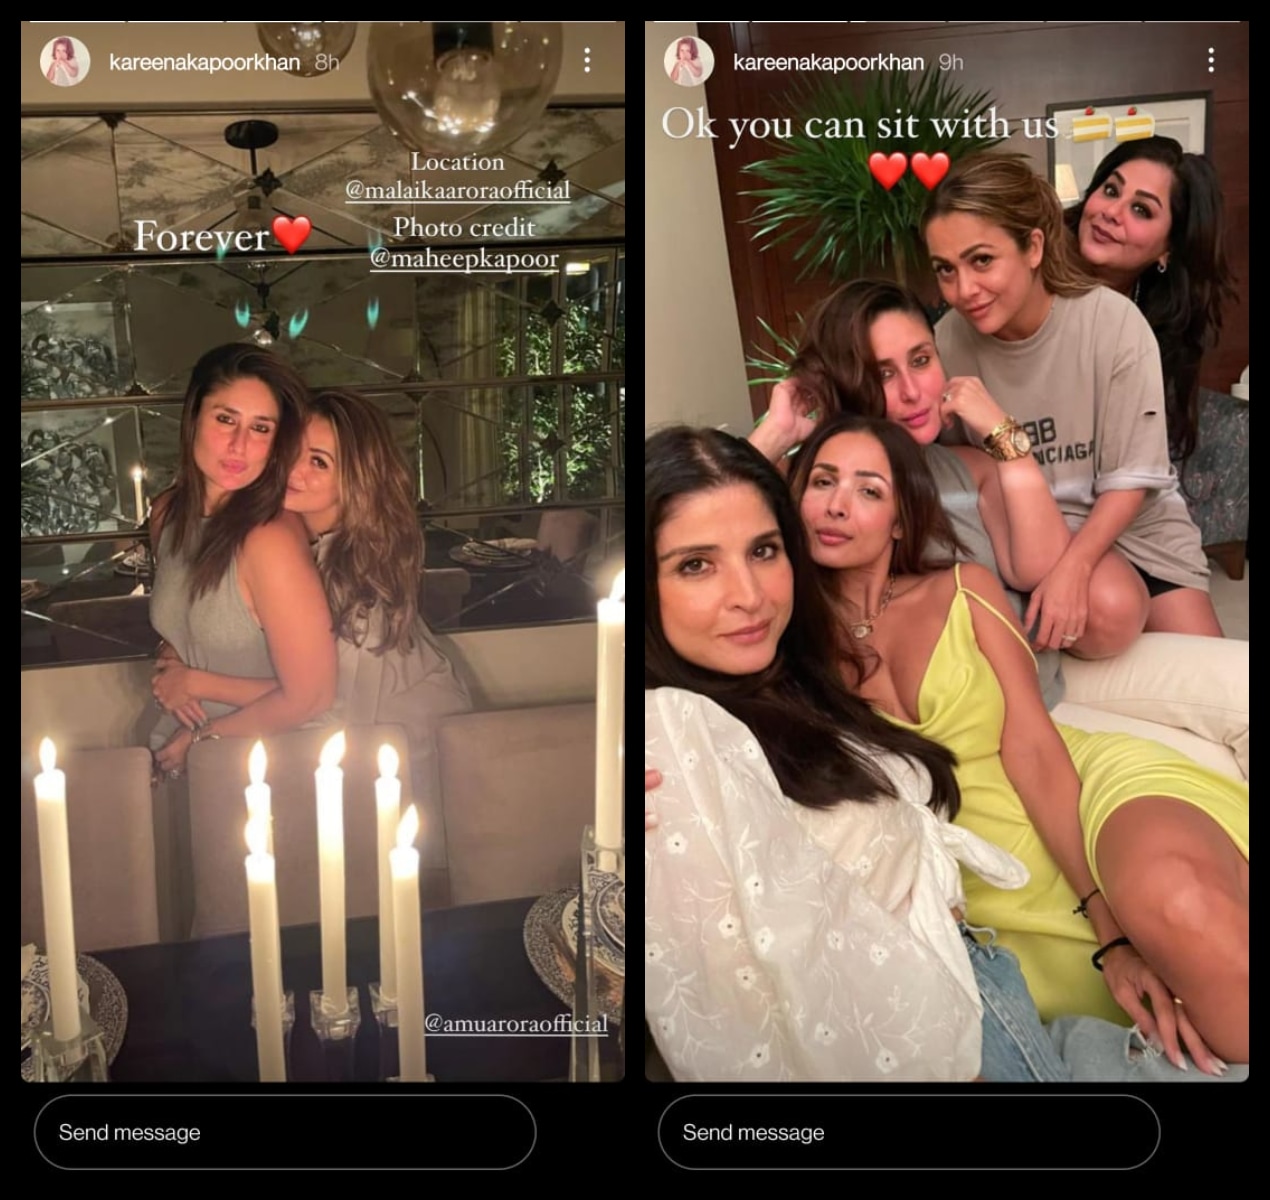 Kareena Kapoor shared pictures from her get-together on Sunday night on Instagram Stories.